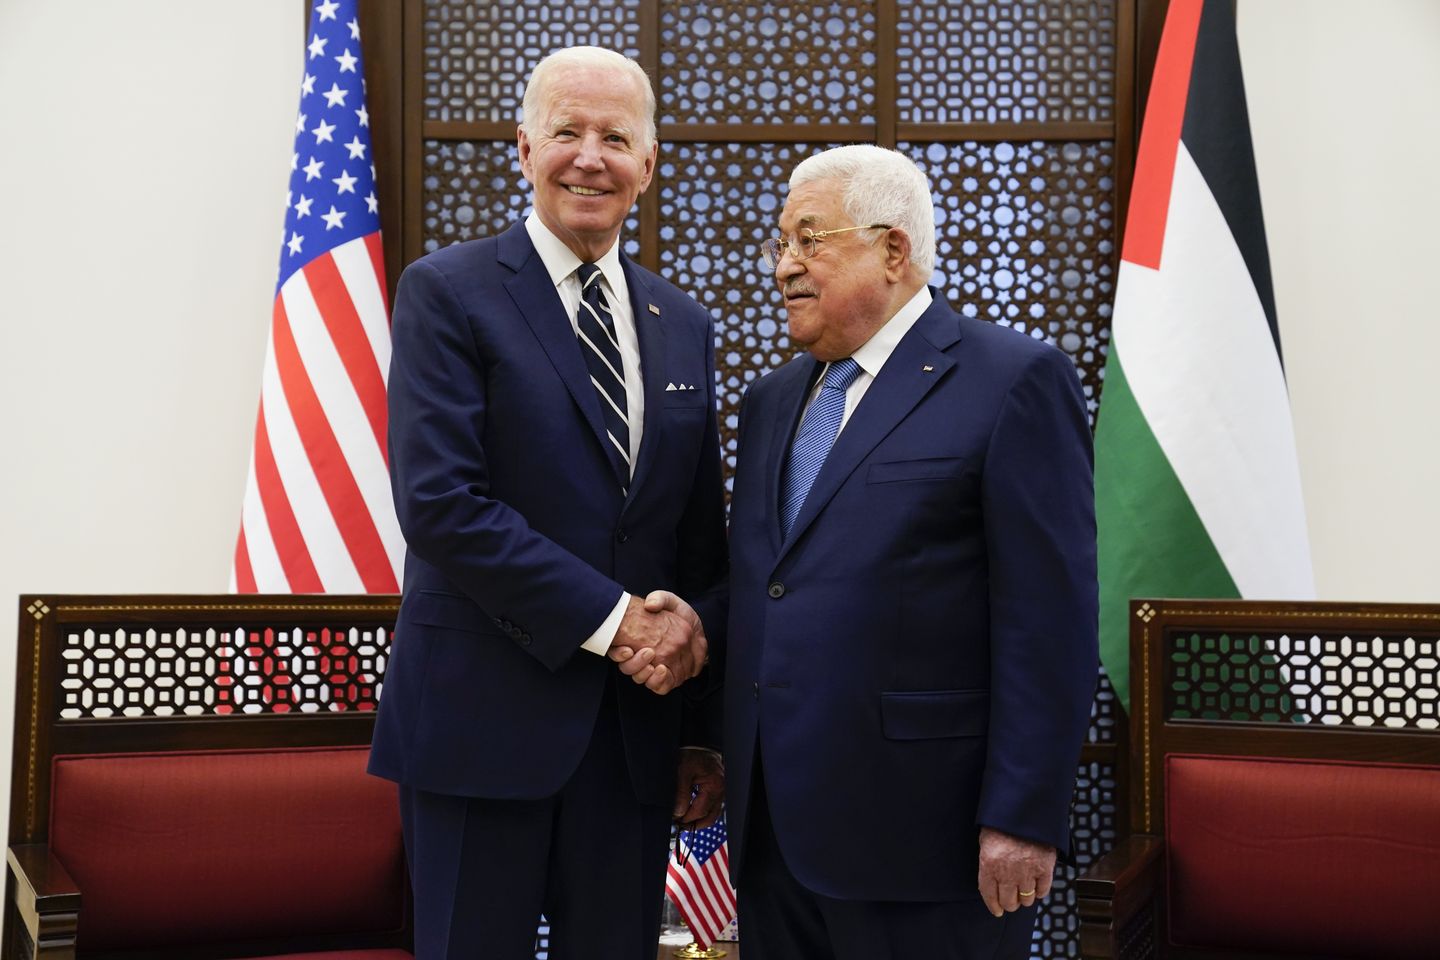 In West Bank, Biden embraces 'two states for two peoples'